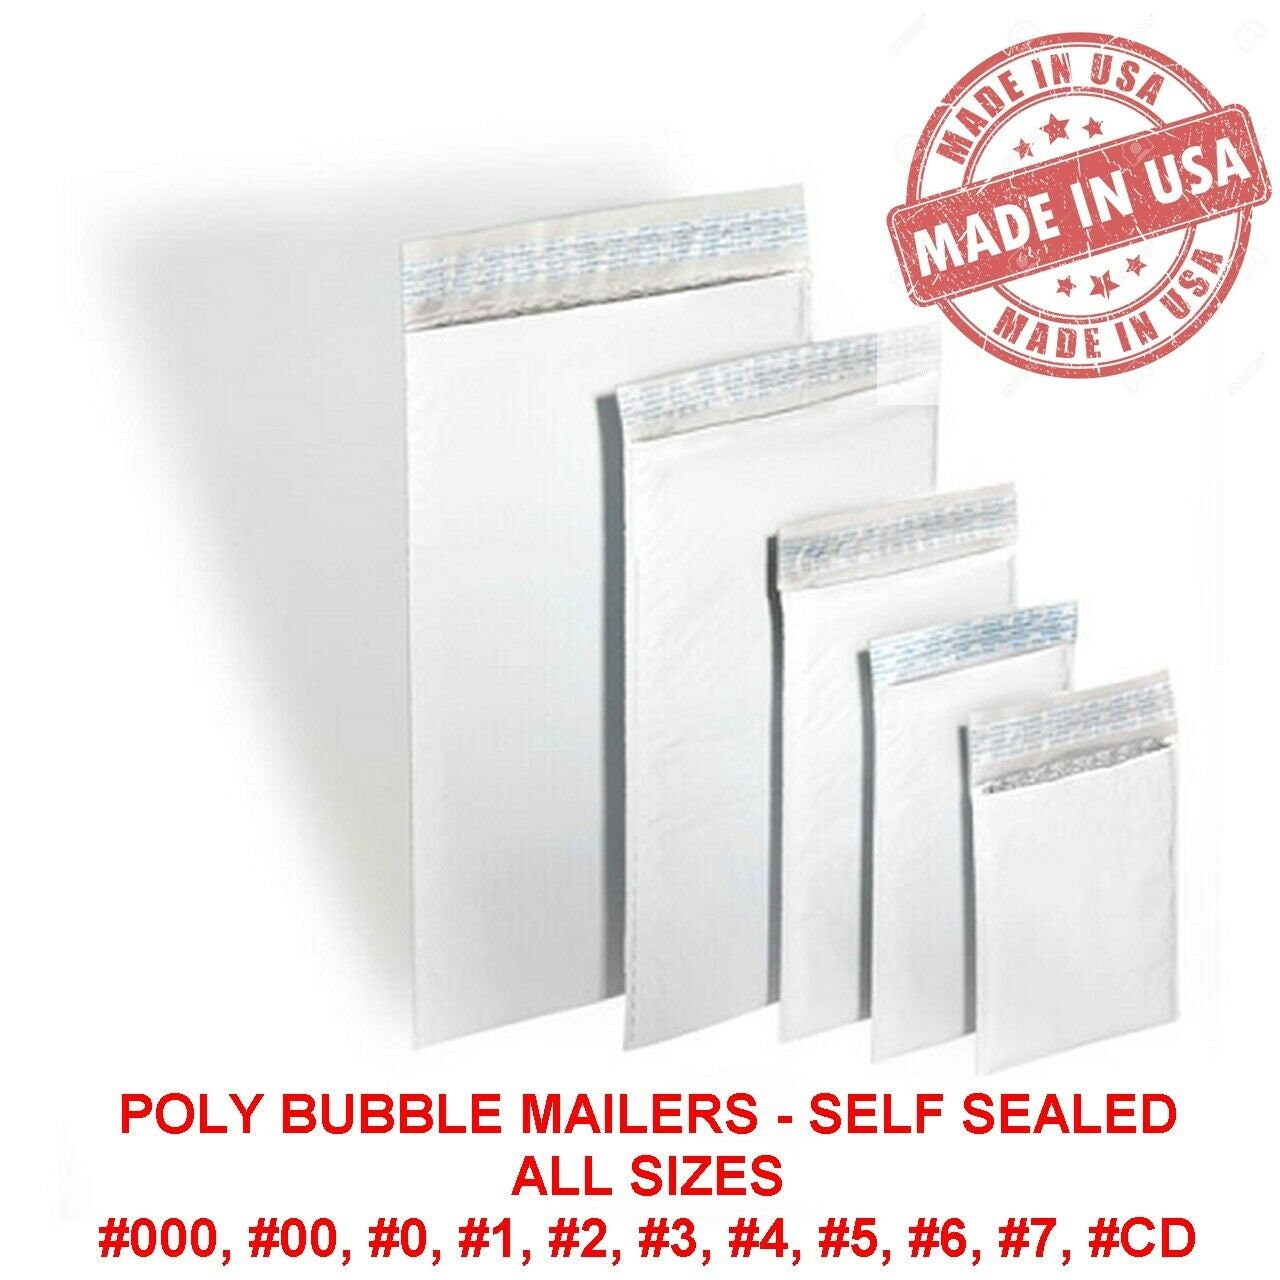 Poly Bubble Mailers #000 #00 #0 #CD #1 #2 #3 #4 #5 #6 #7 PADDED BAGS SHIPPING 